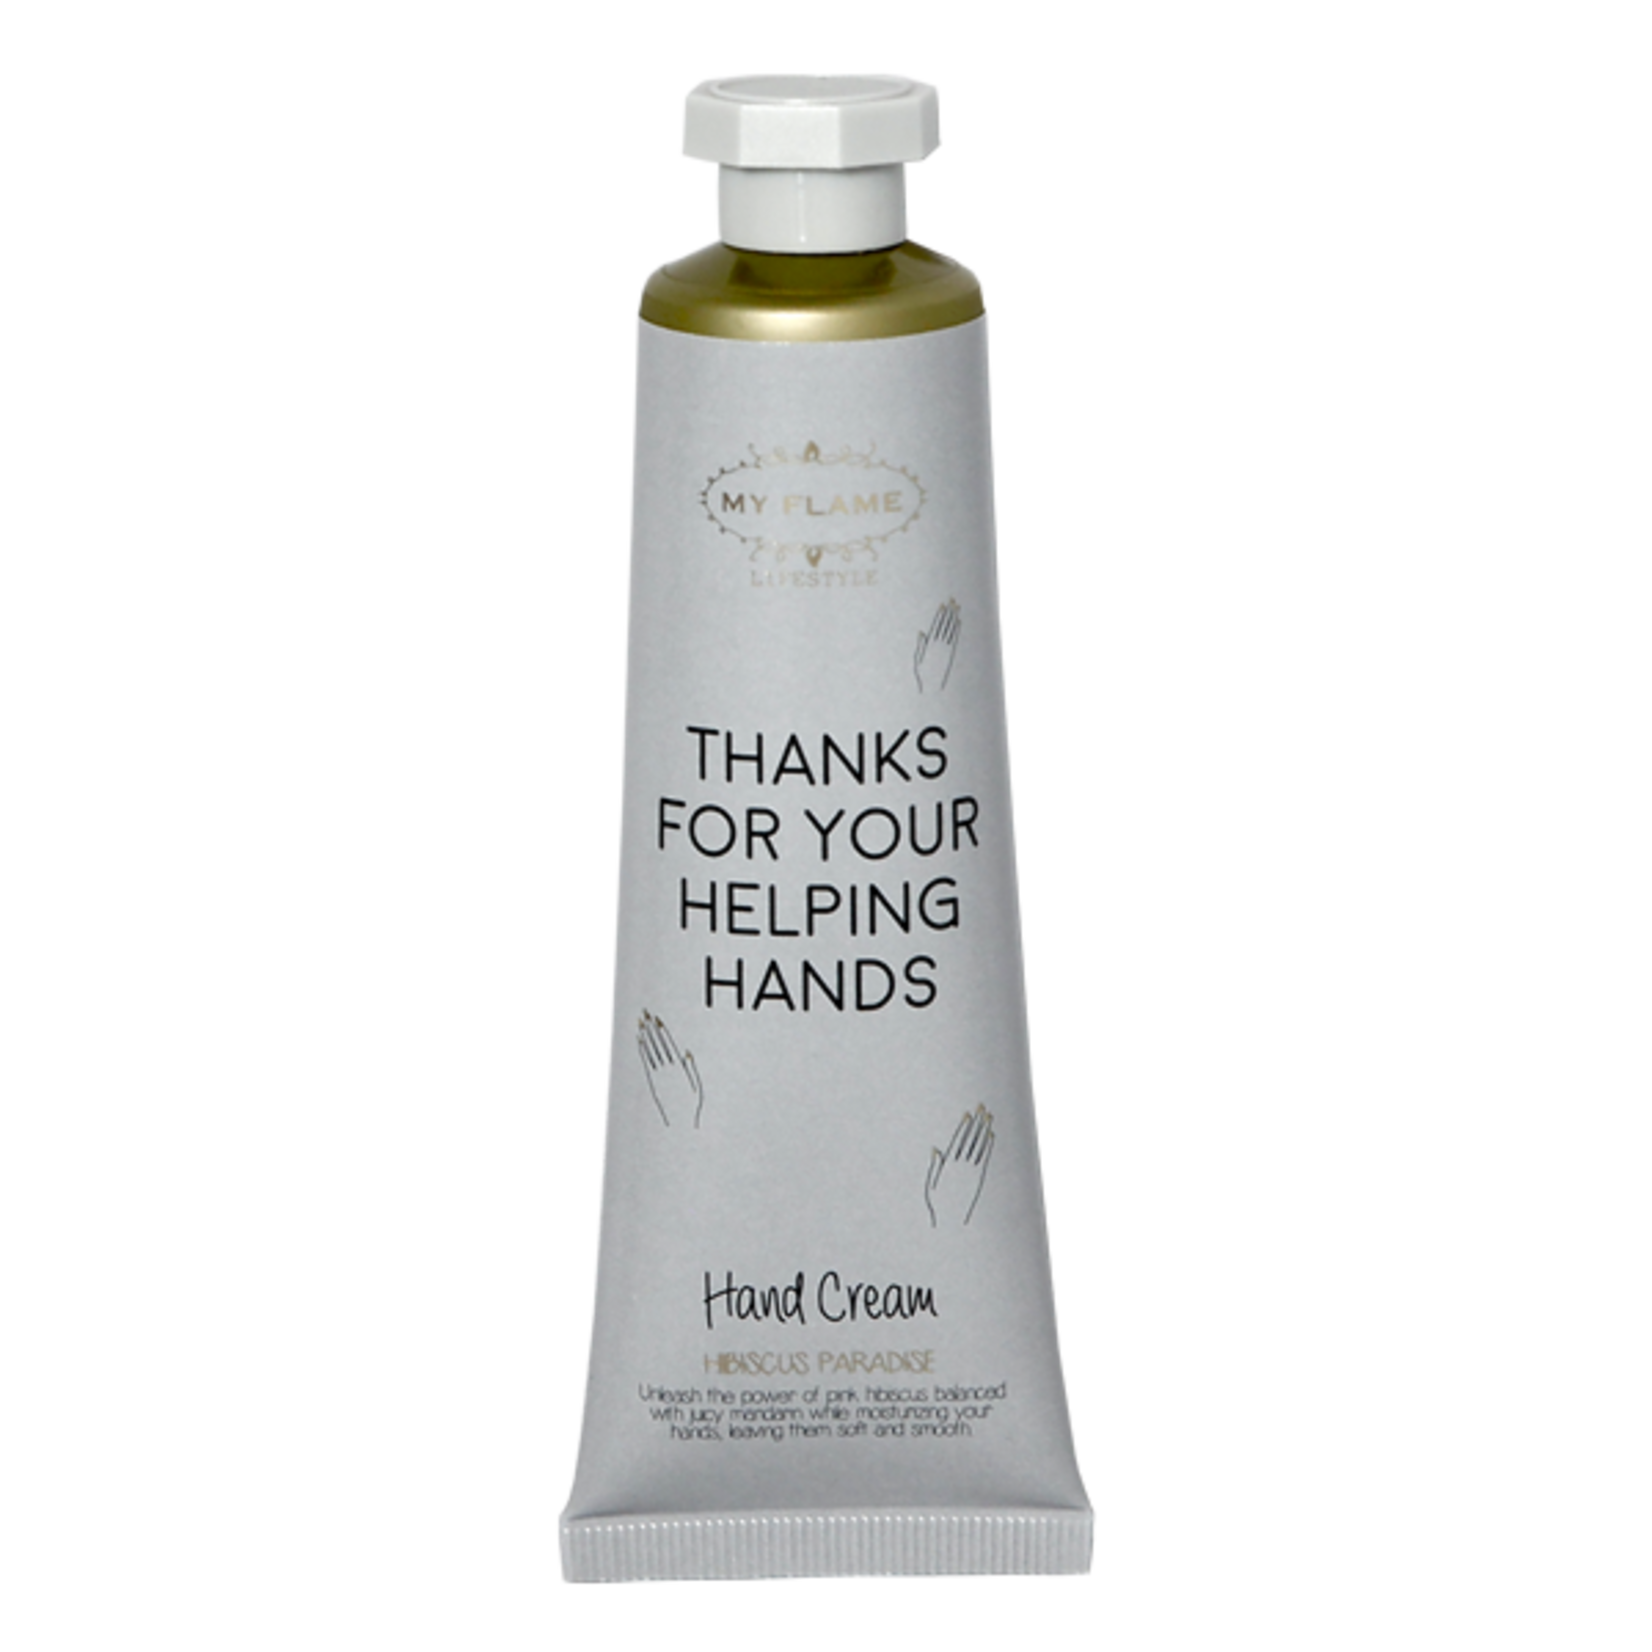 MY FLAME HANDCREME THANKS FOR YOUR HELPING HANDS